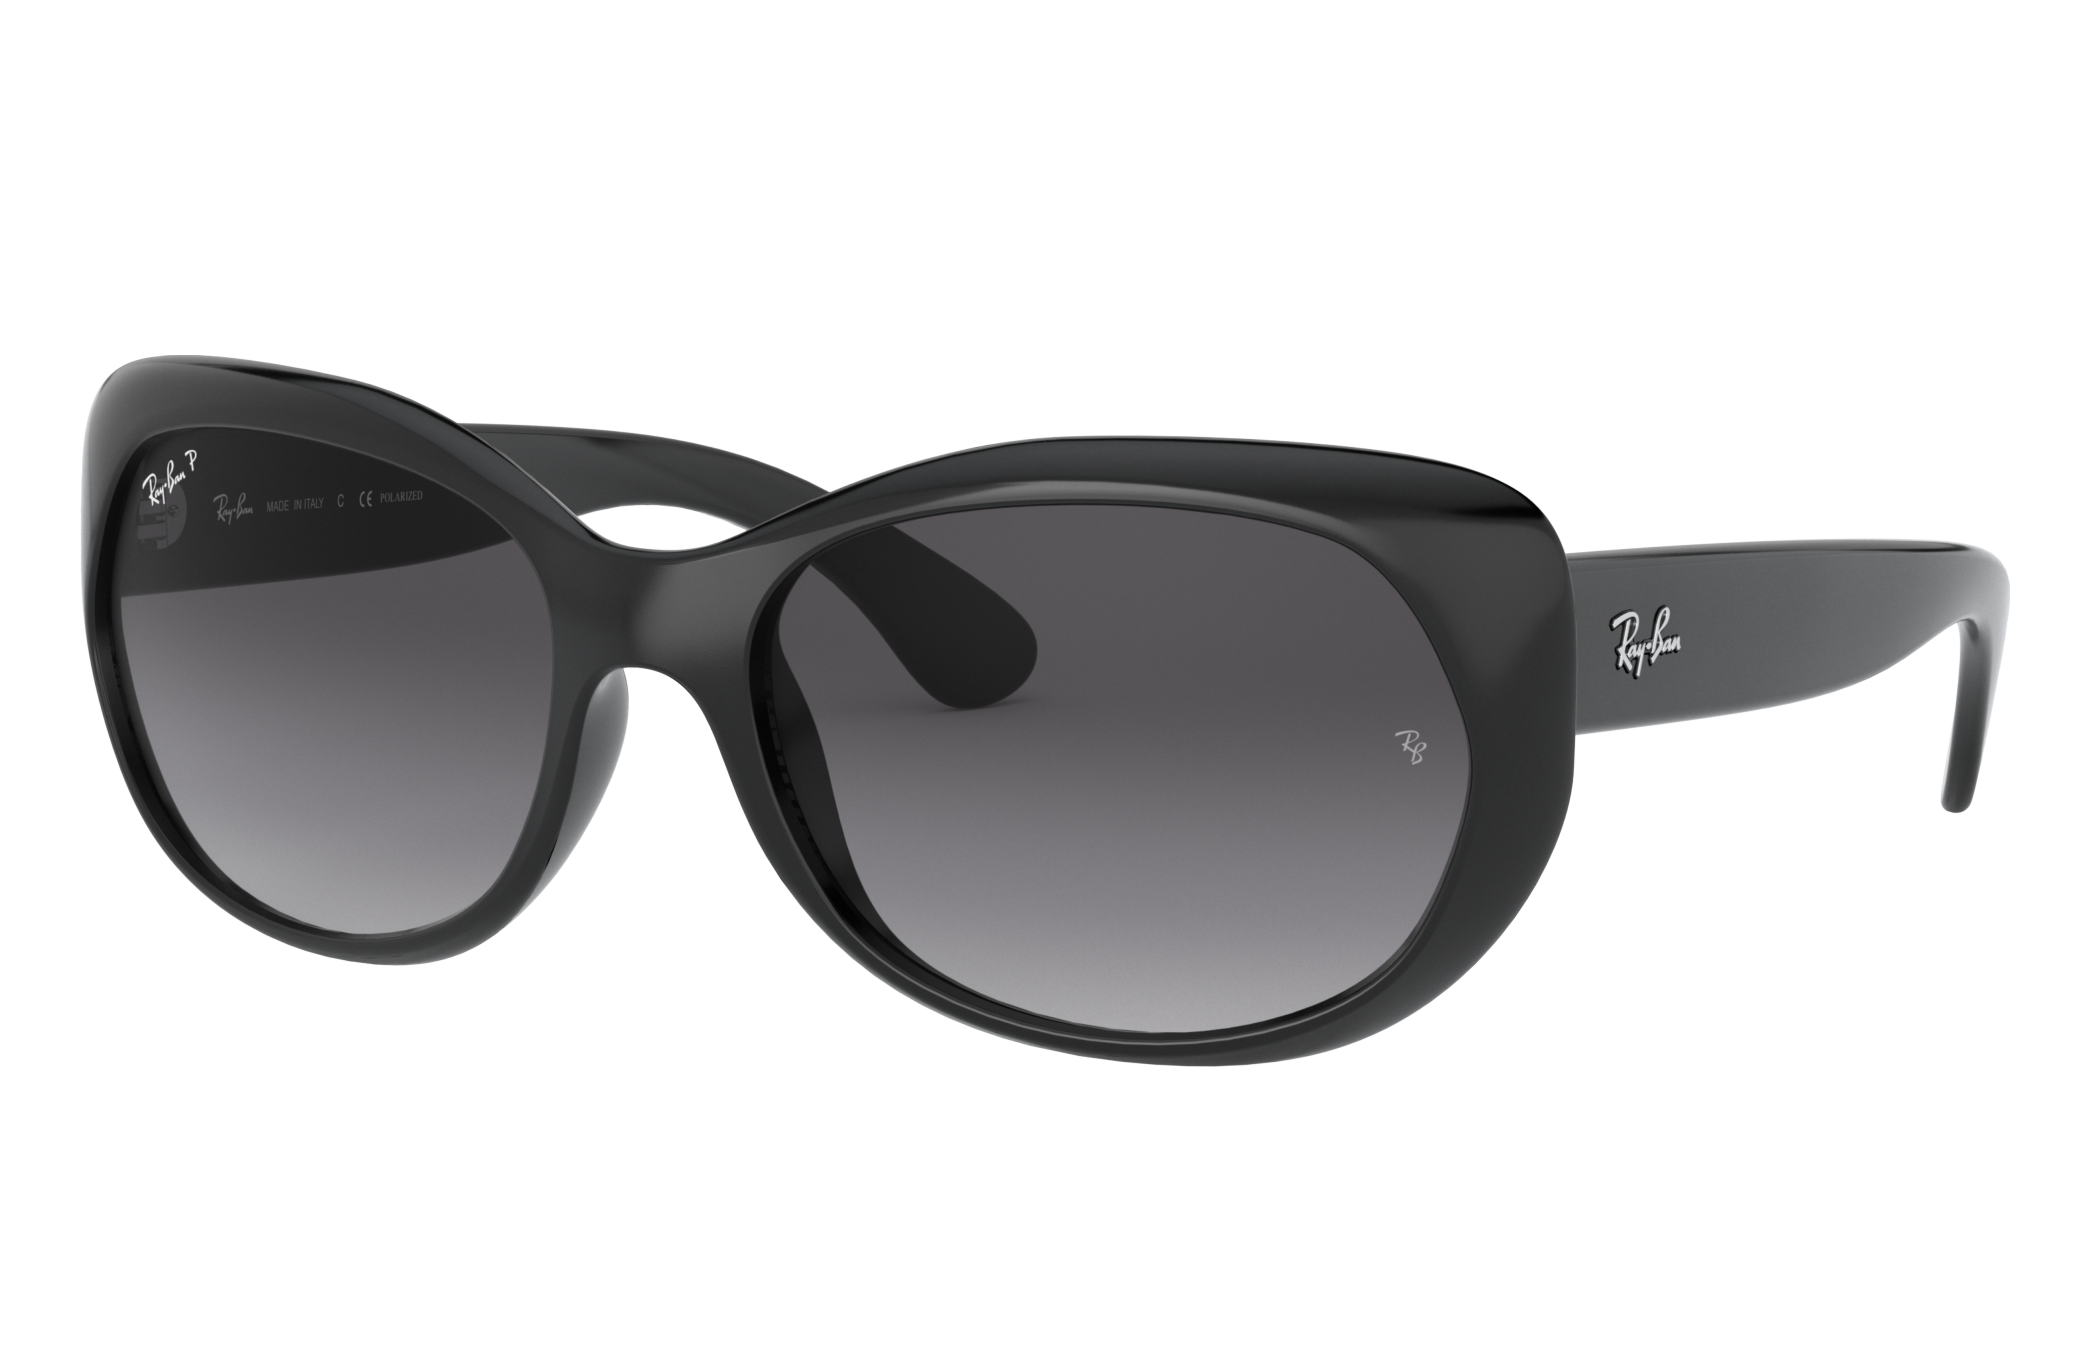 Rb4325 Sunglasses in Black and Grey - RB4325 | Ray-Ban®